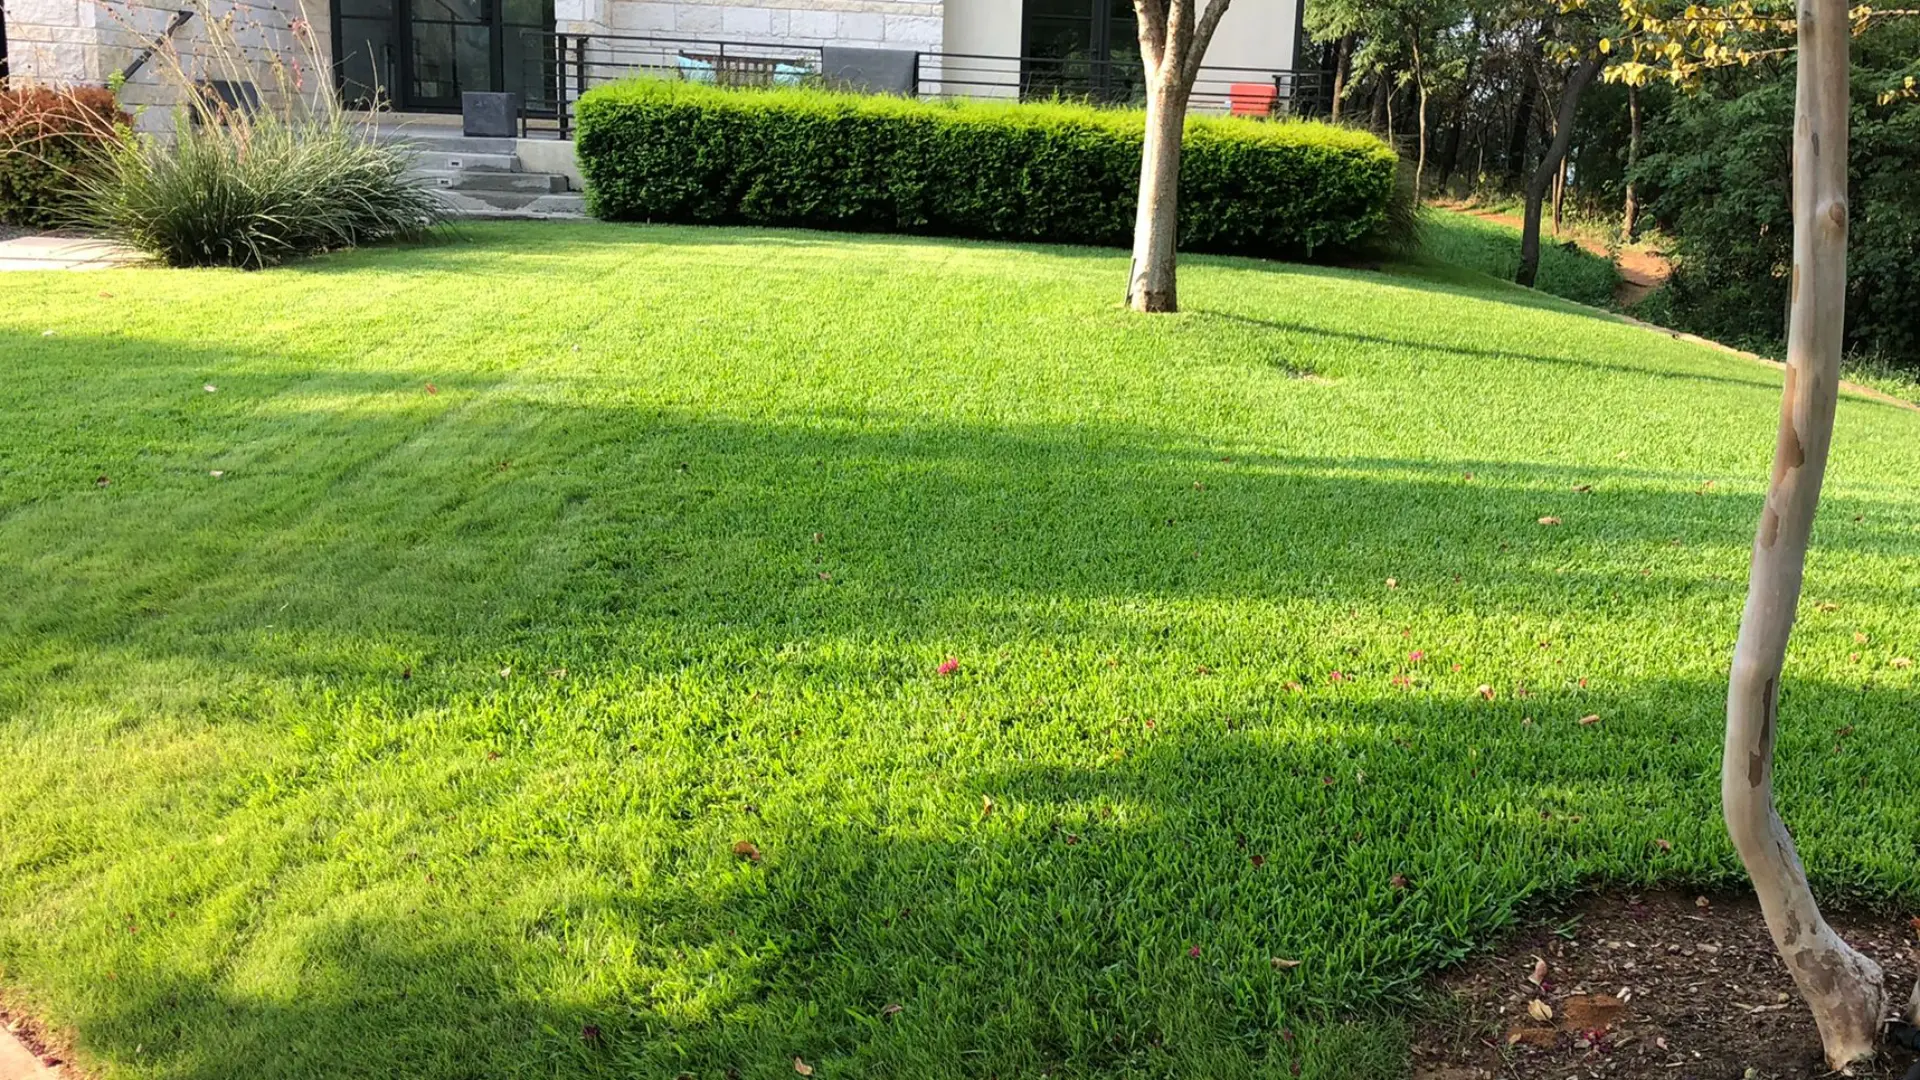 Should You Mow Your Lawn Before Applying a Spring Fertilization Treatment?